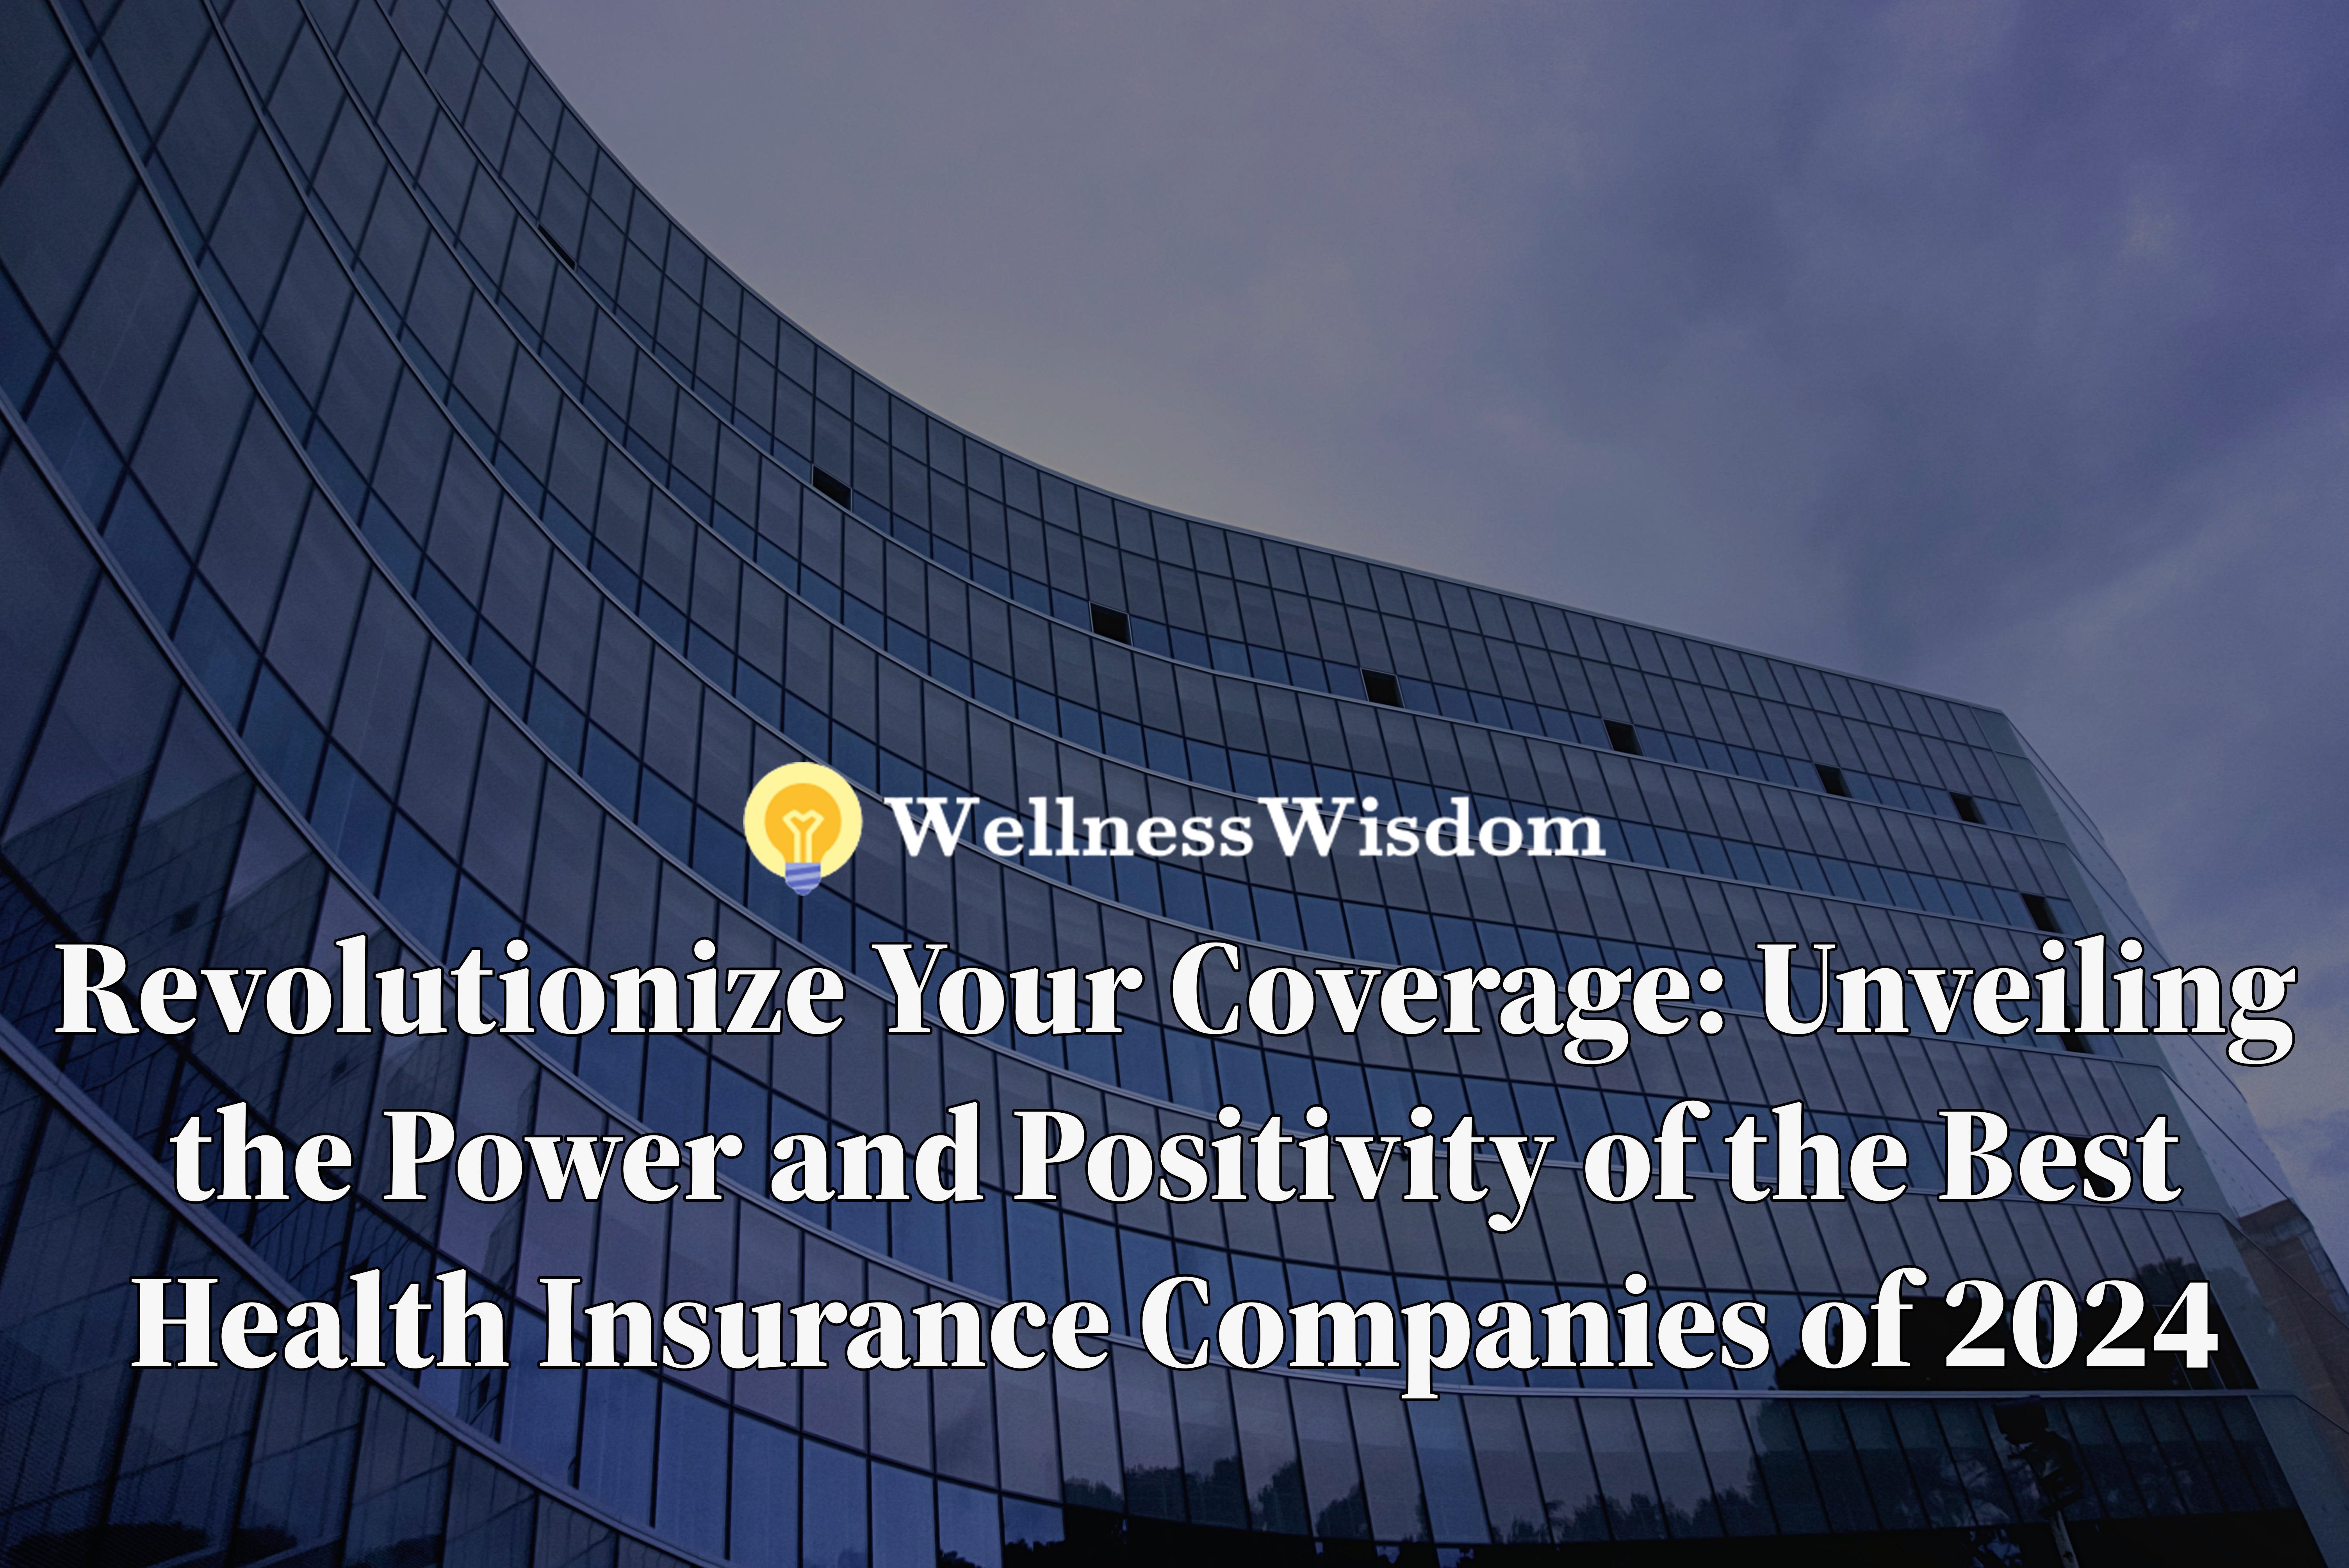 Health insurance, Best health insurance companies, Healthcare coverage, Financial security, Comprehensive insurance, Preventive care, Peace of mind, Affordable healthcare, Provider network, Customer service, Wellness programs, Telemedicine, Health incentives, Health investment.